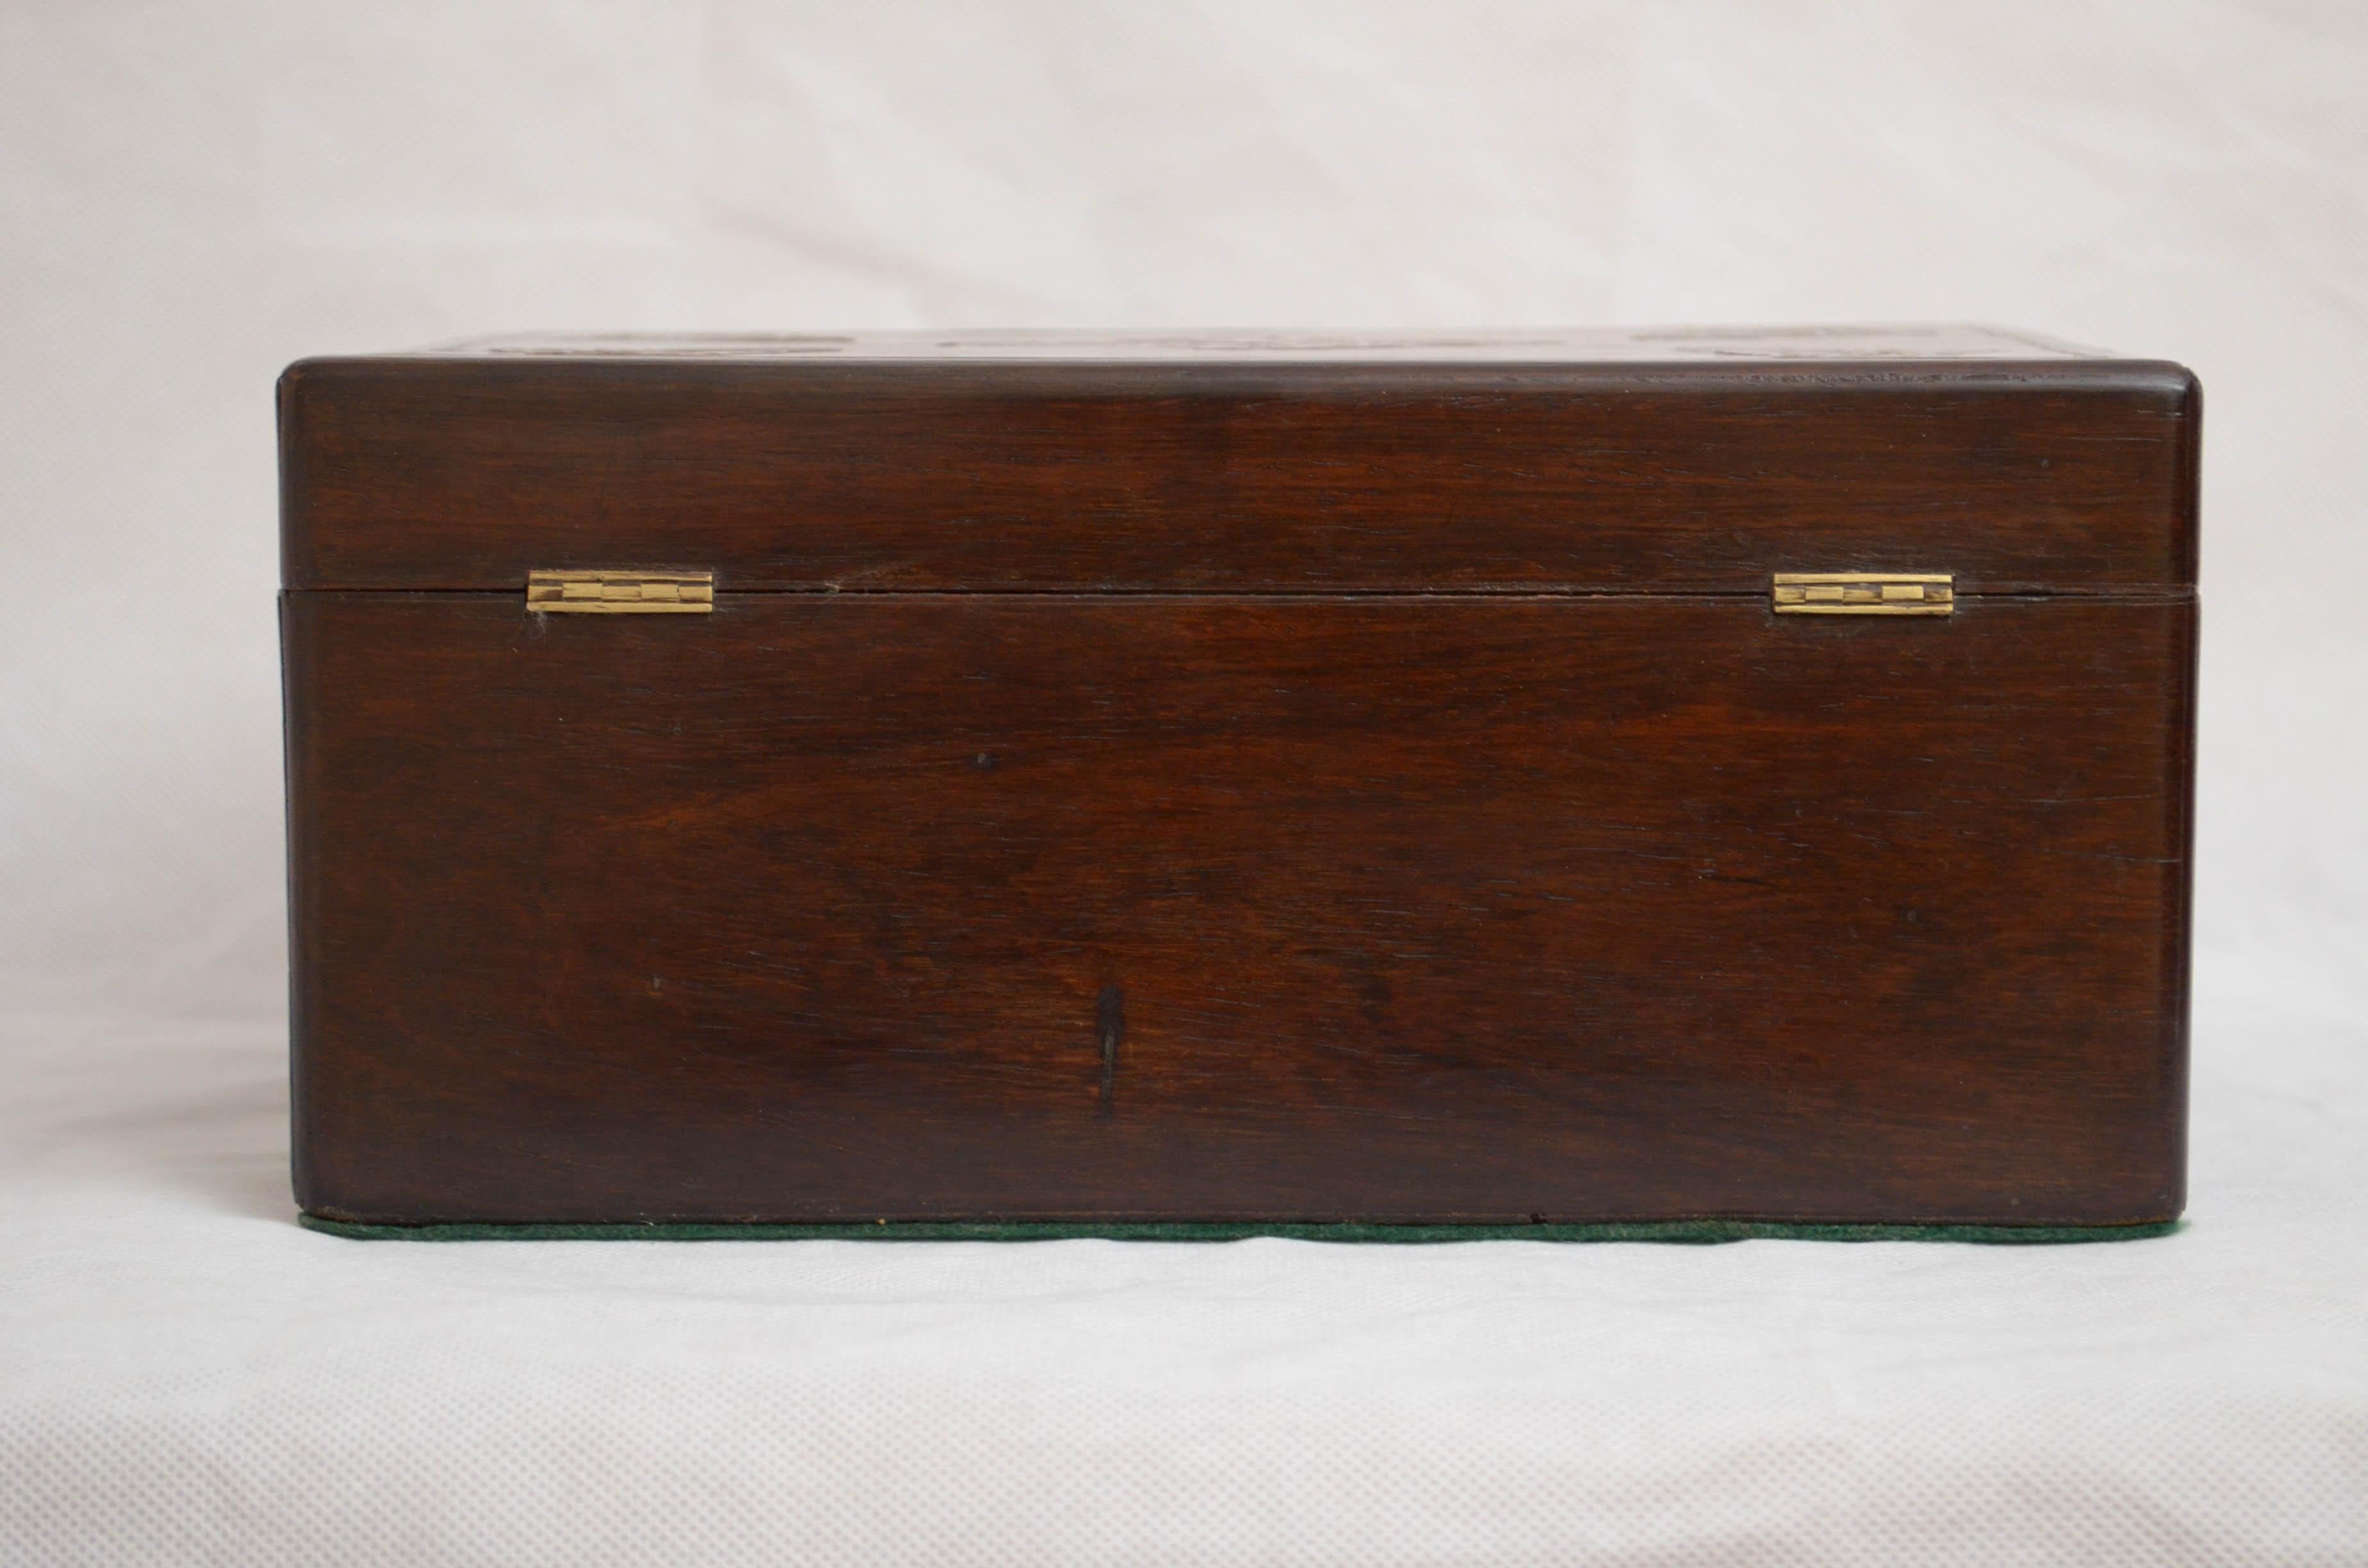 Elegant Early Victorian Jewelry Box with Tray For Sale 5